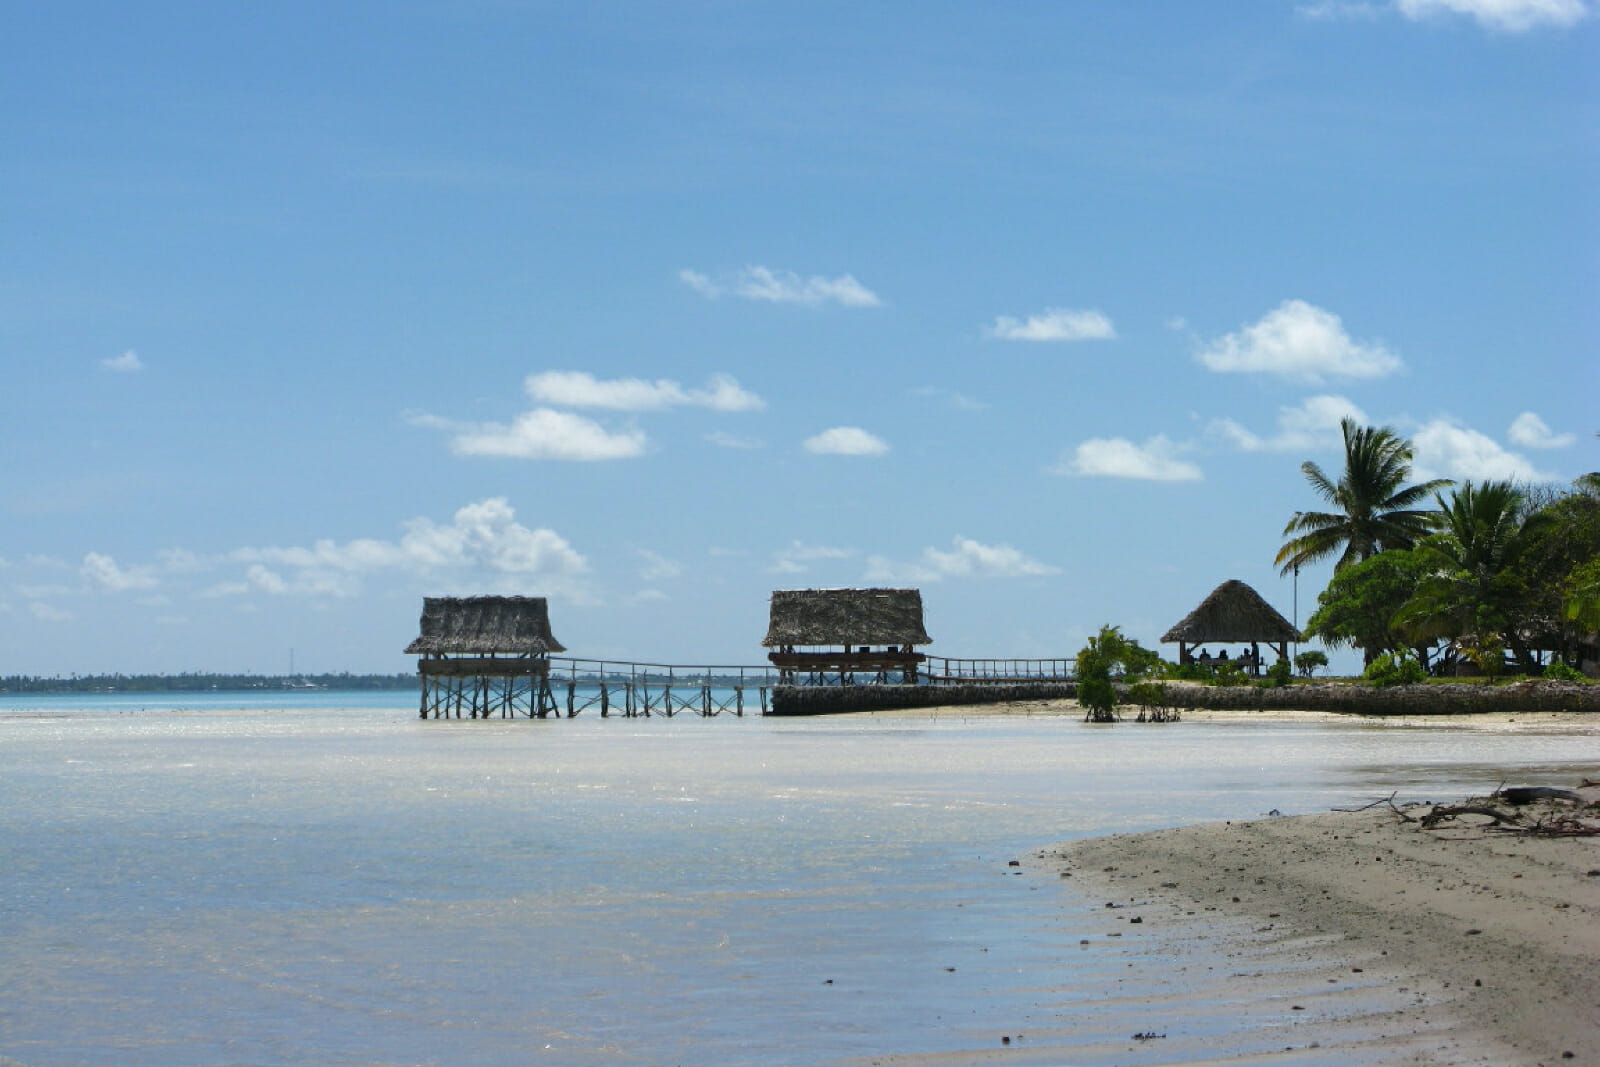 Climate Change is Killing the Pacific Island Nation of Kiribati - International Policy Digest